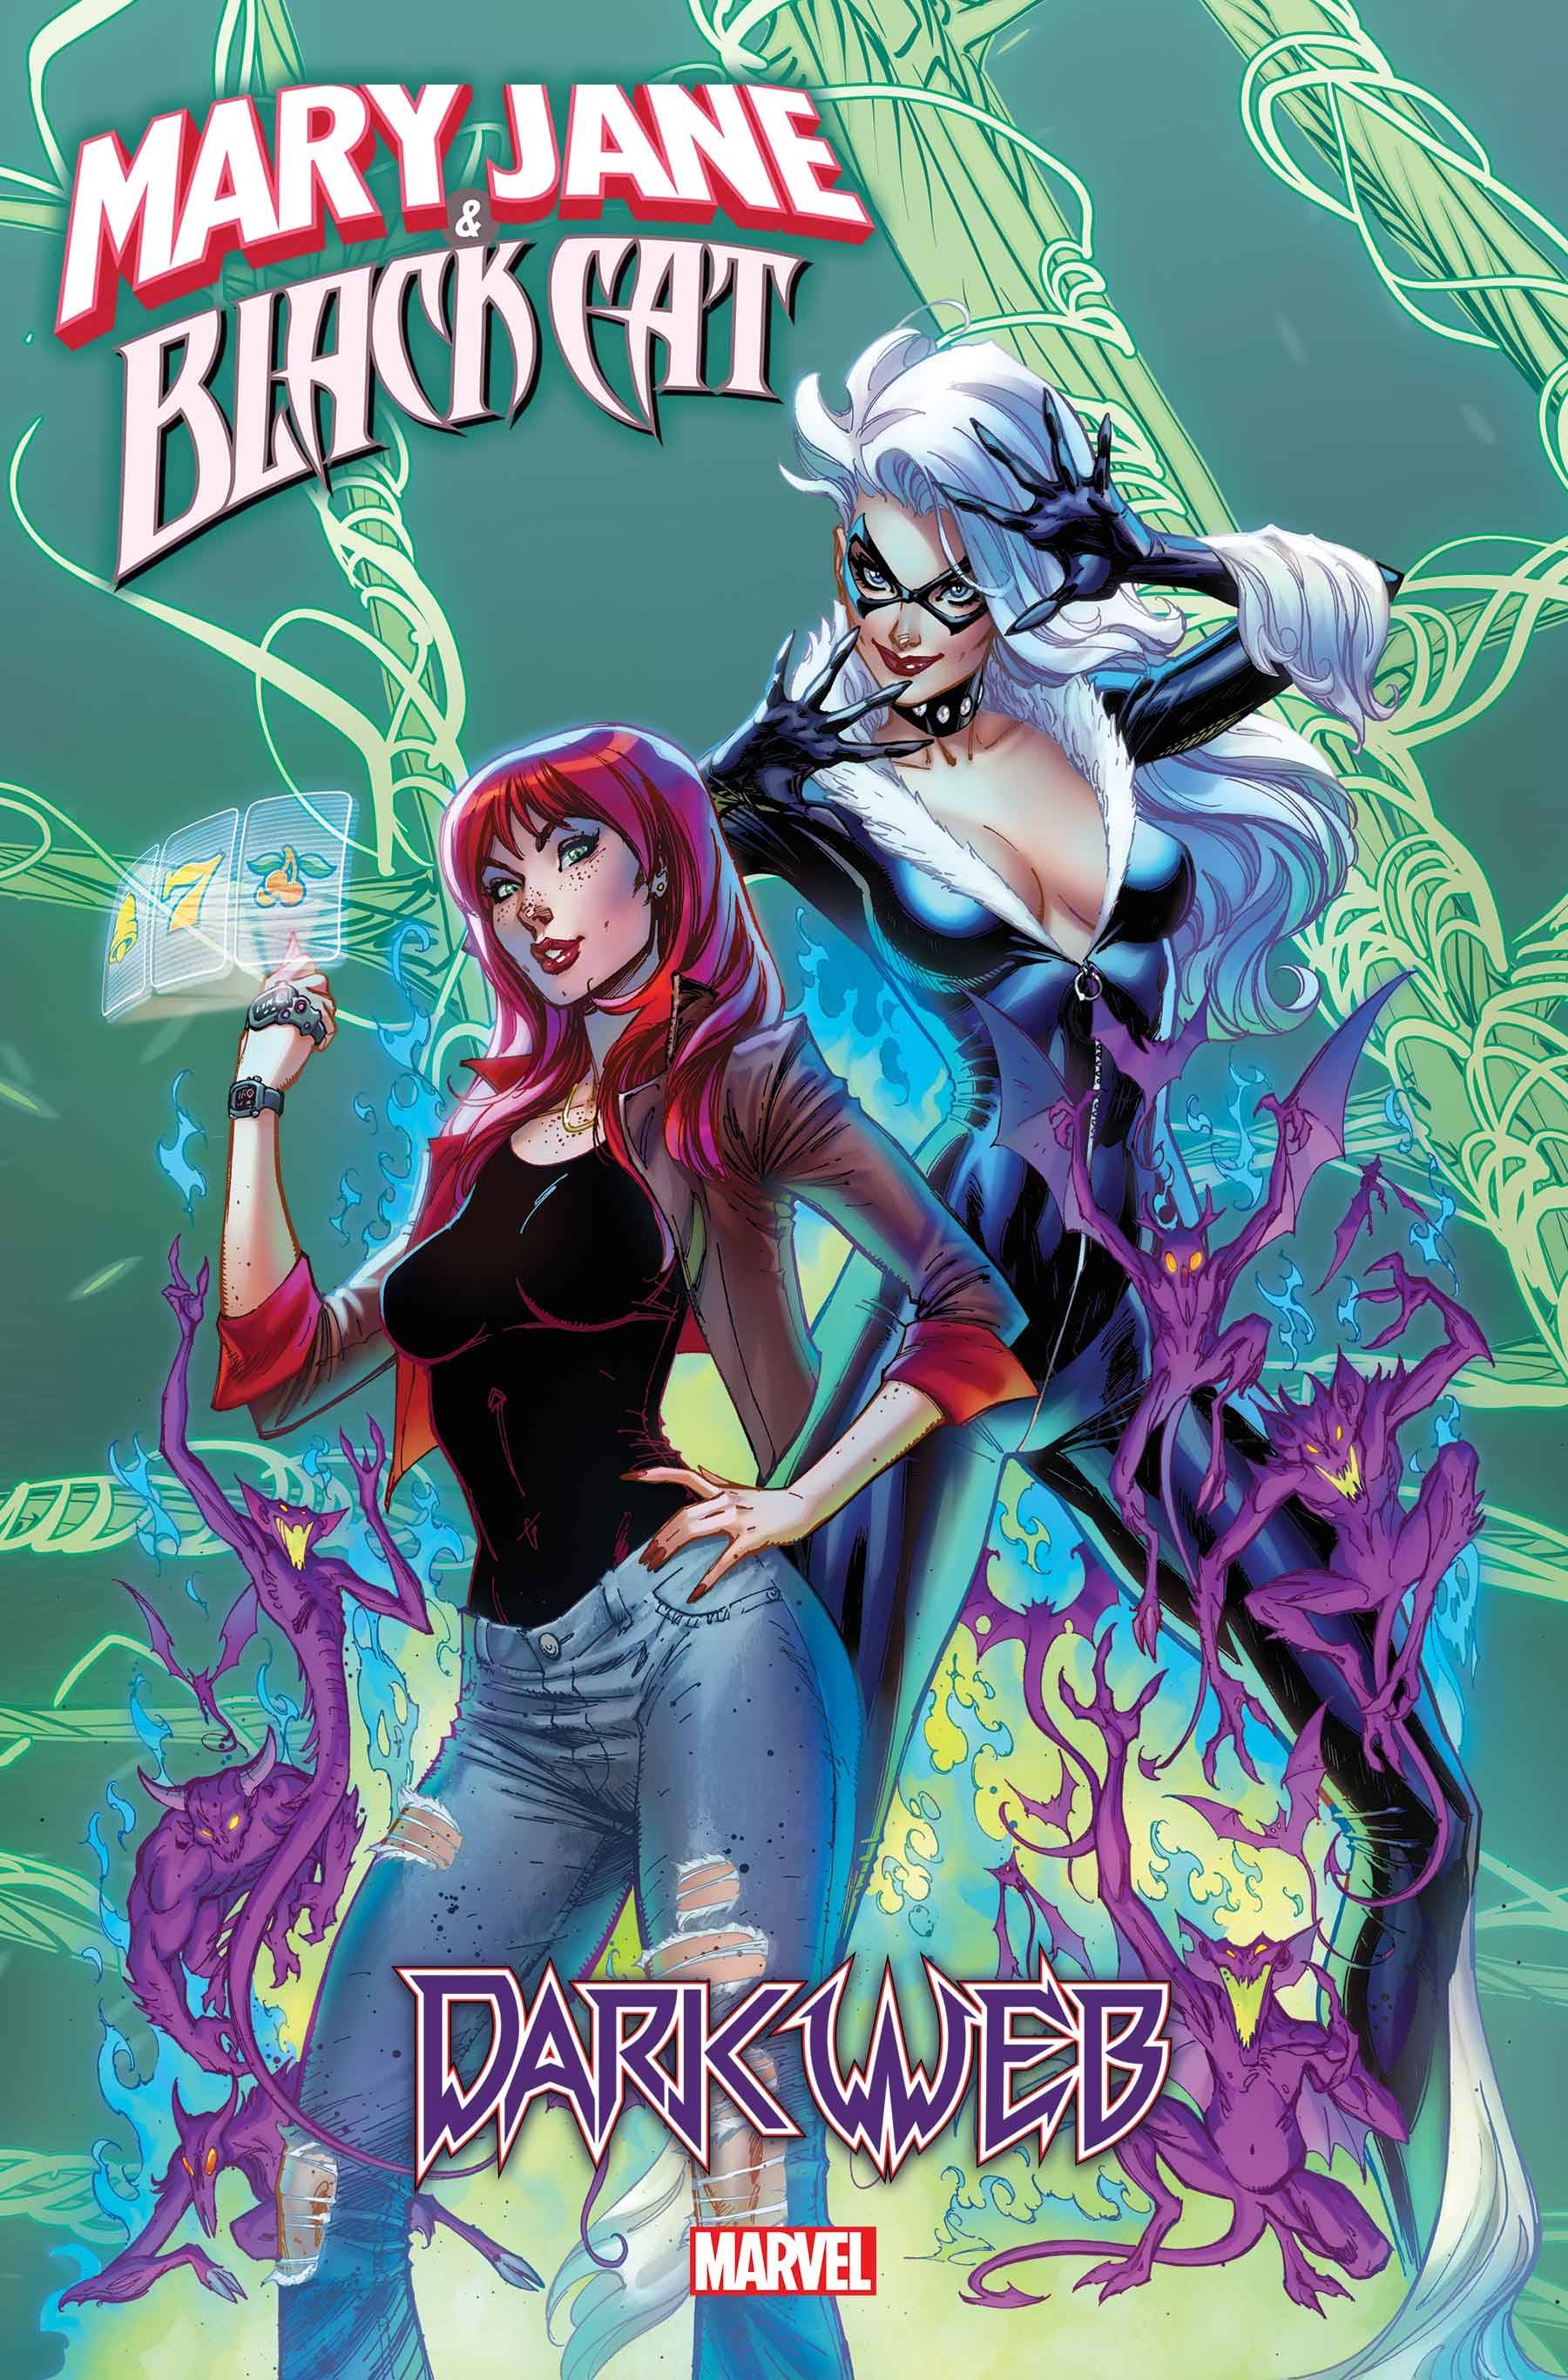 MARY JANE AND BLACK CAT #1 (OF 5)